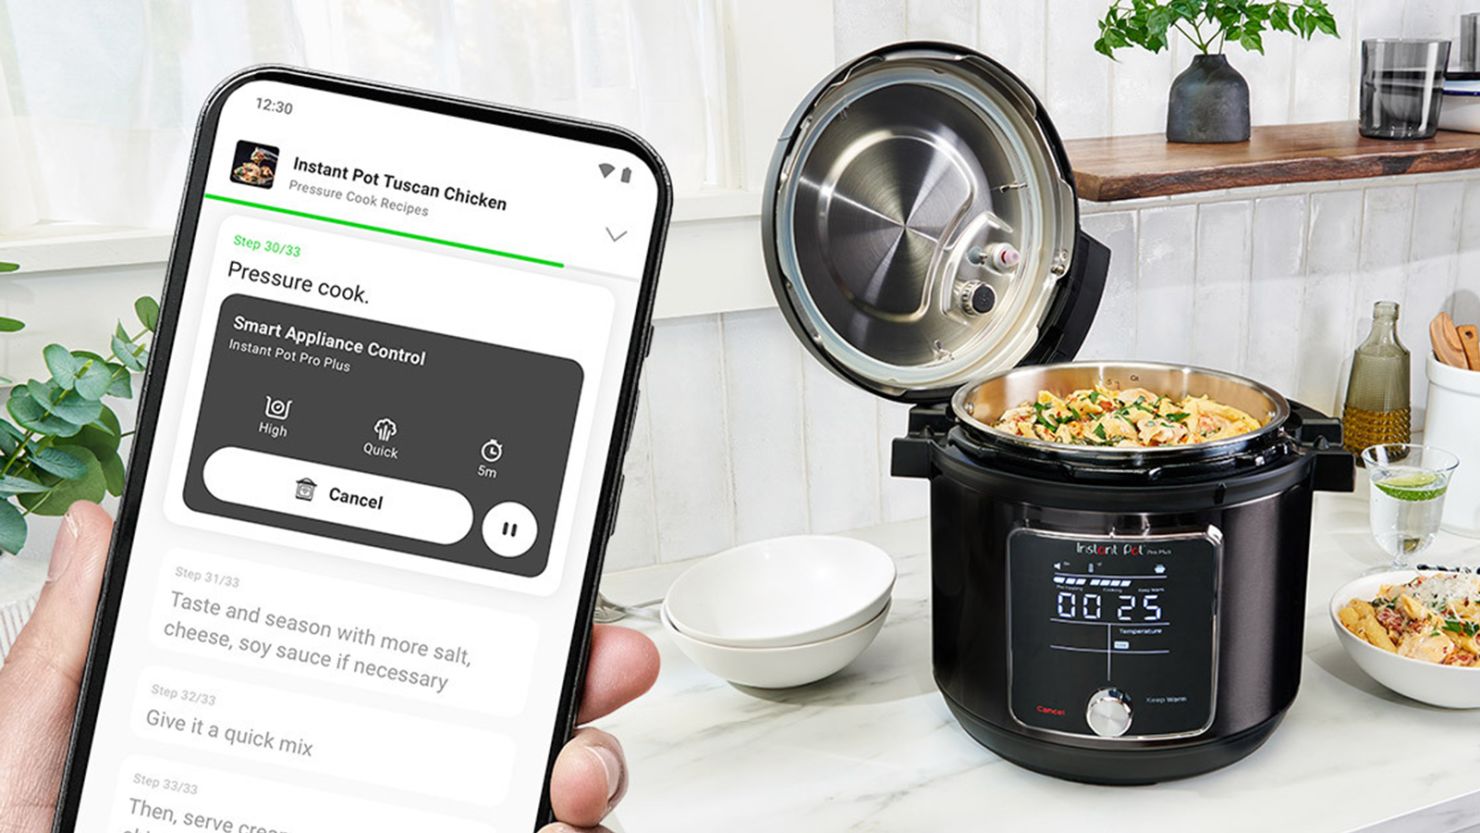 Instant Pot Pro Plus brings smart cooking to the kitchen